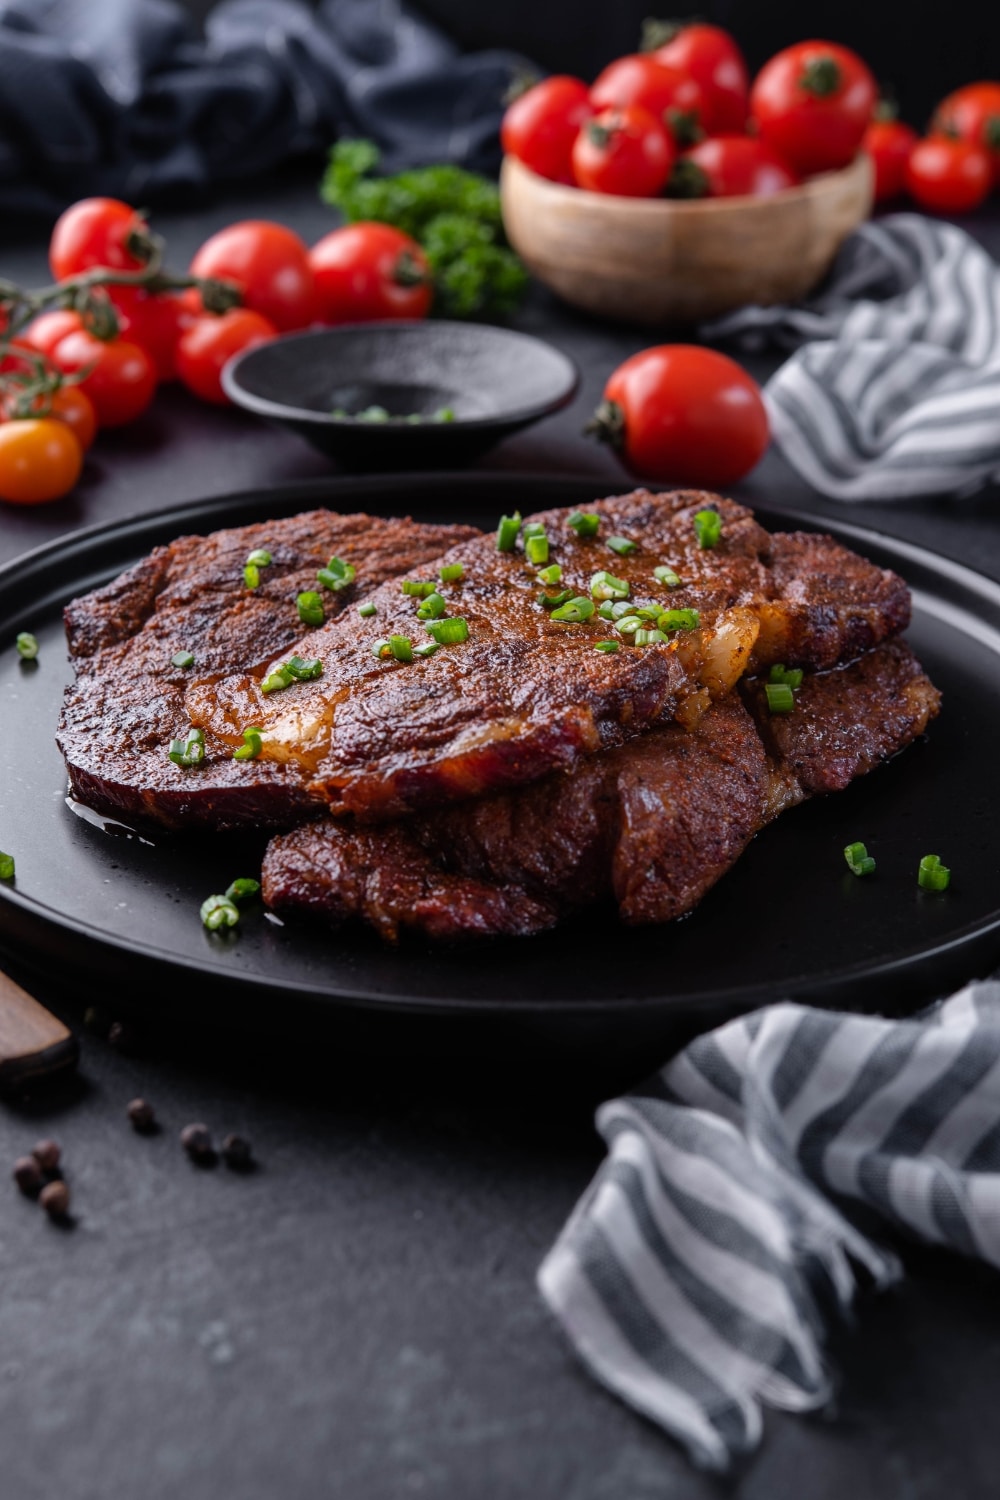 Two grilled ribeye steaks garnished with chopped spring onions and served on a black plate.